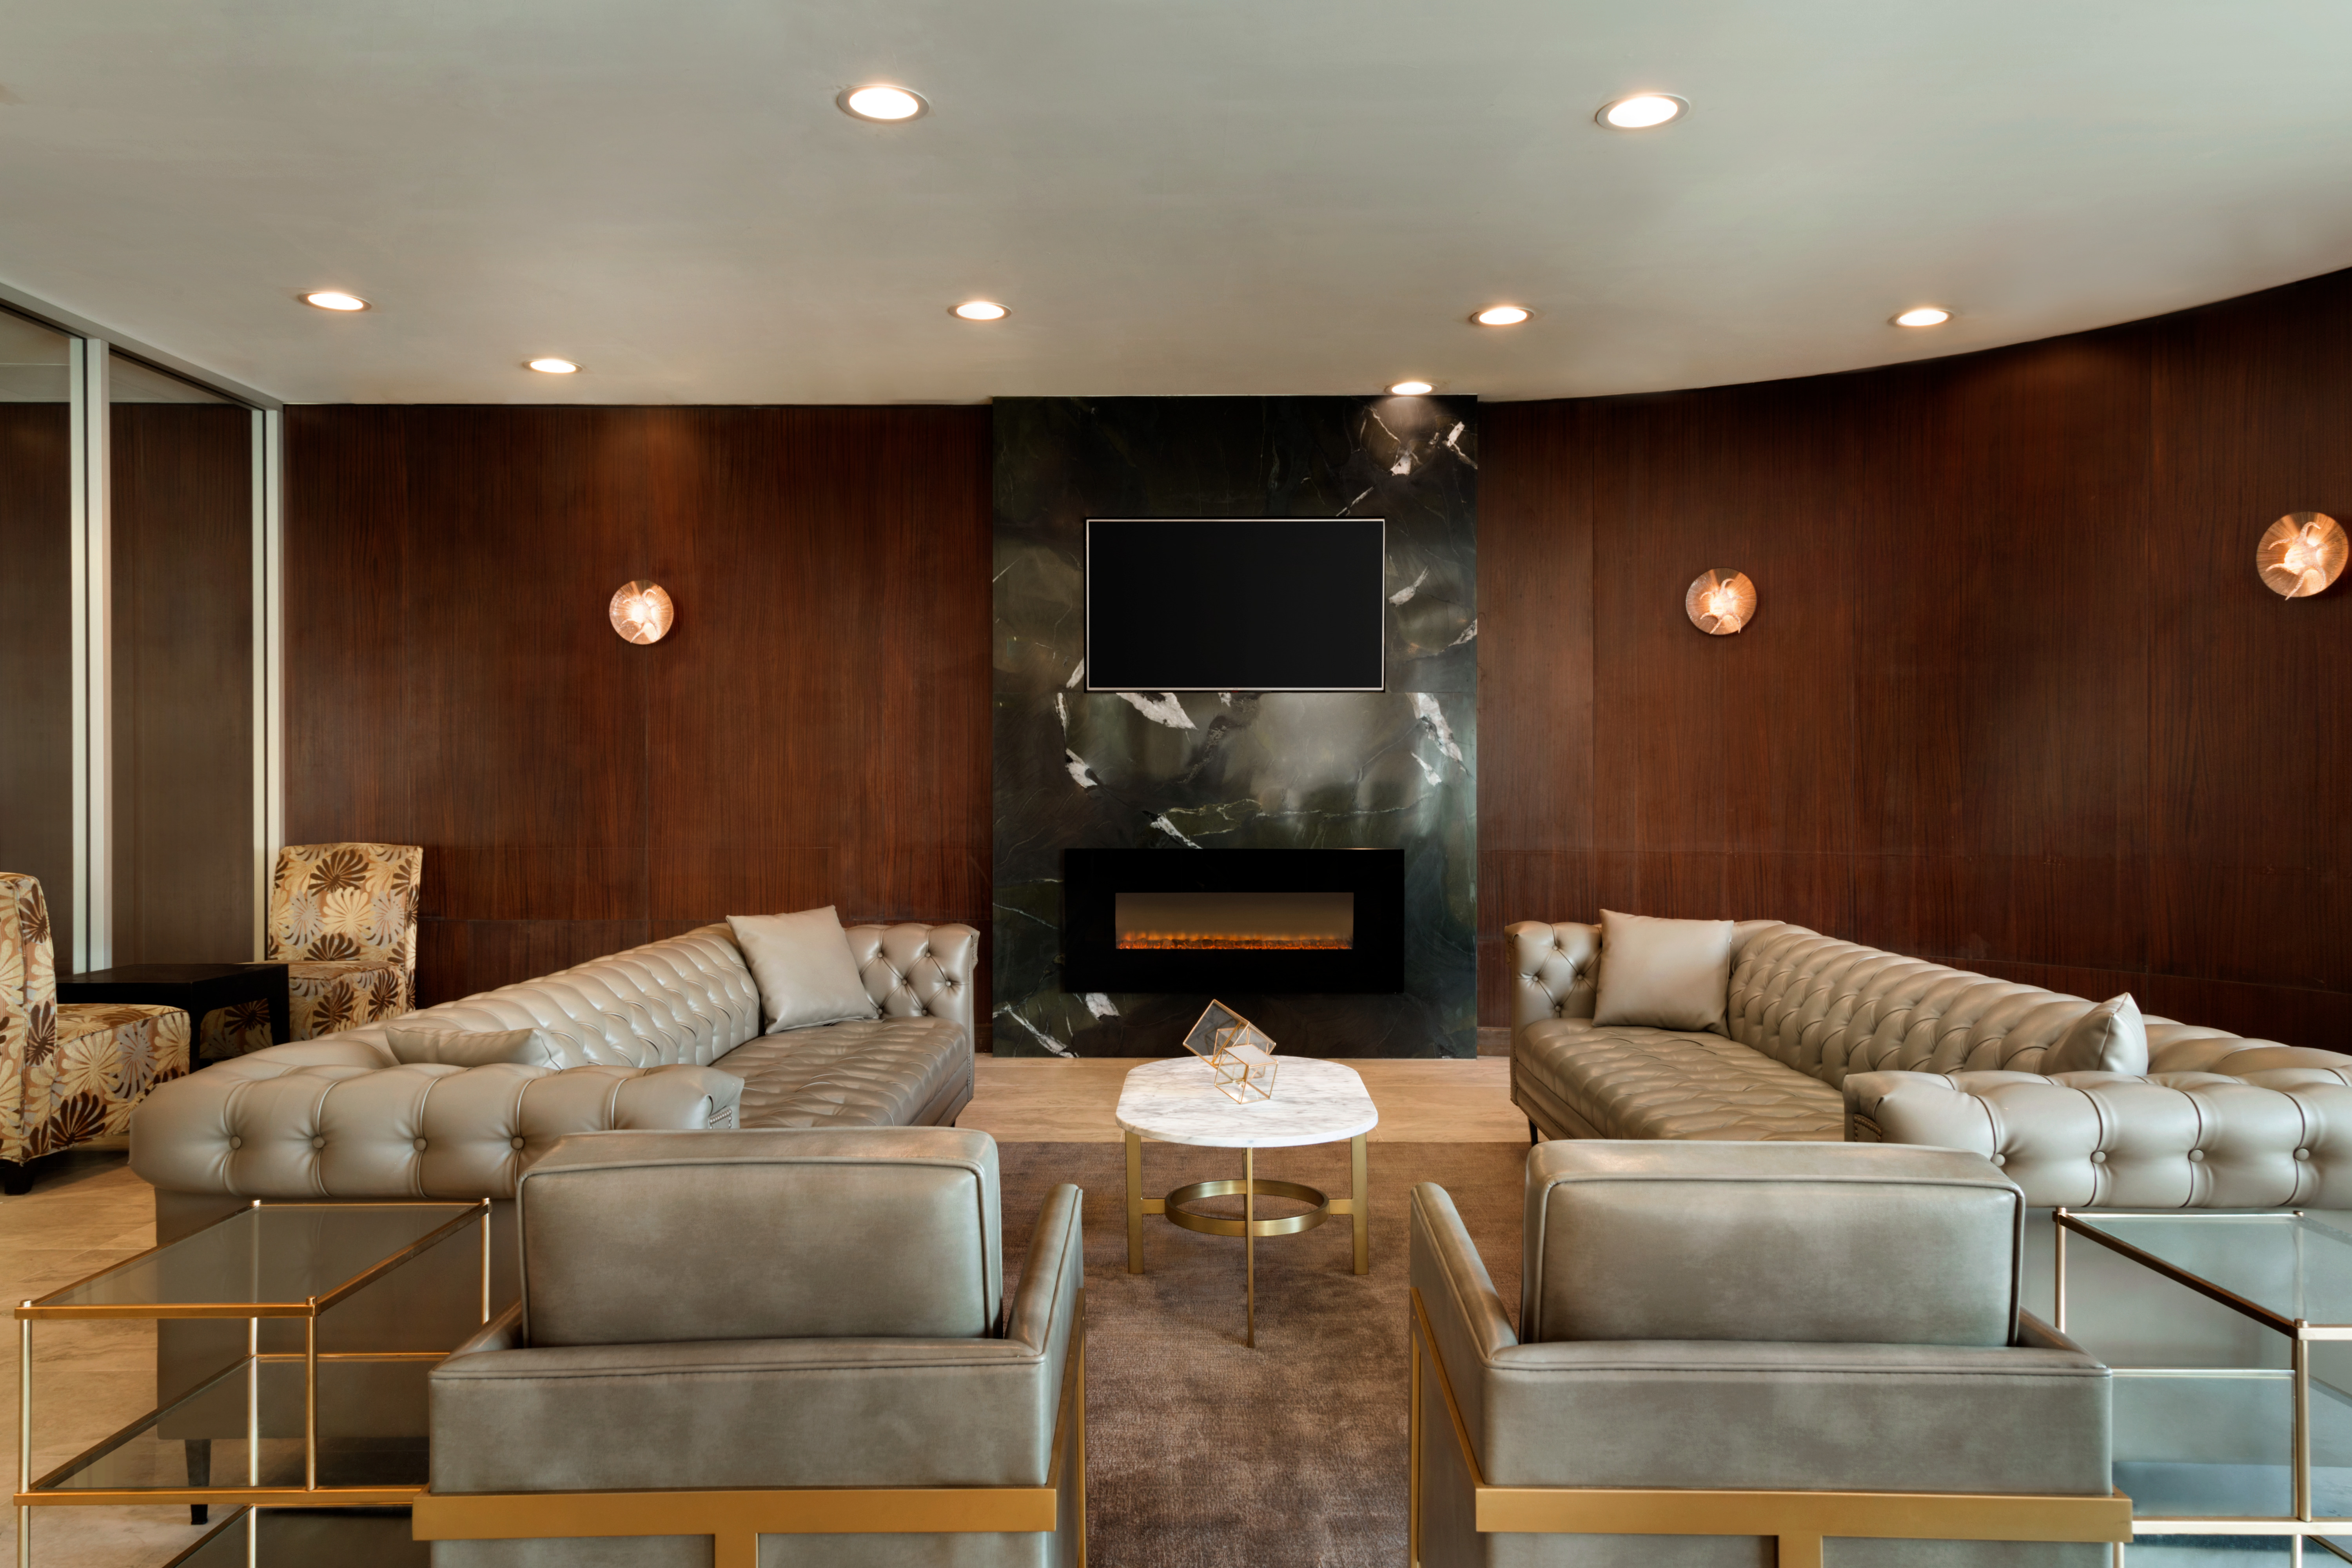 Fireplace seating area